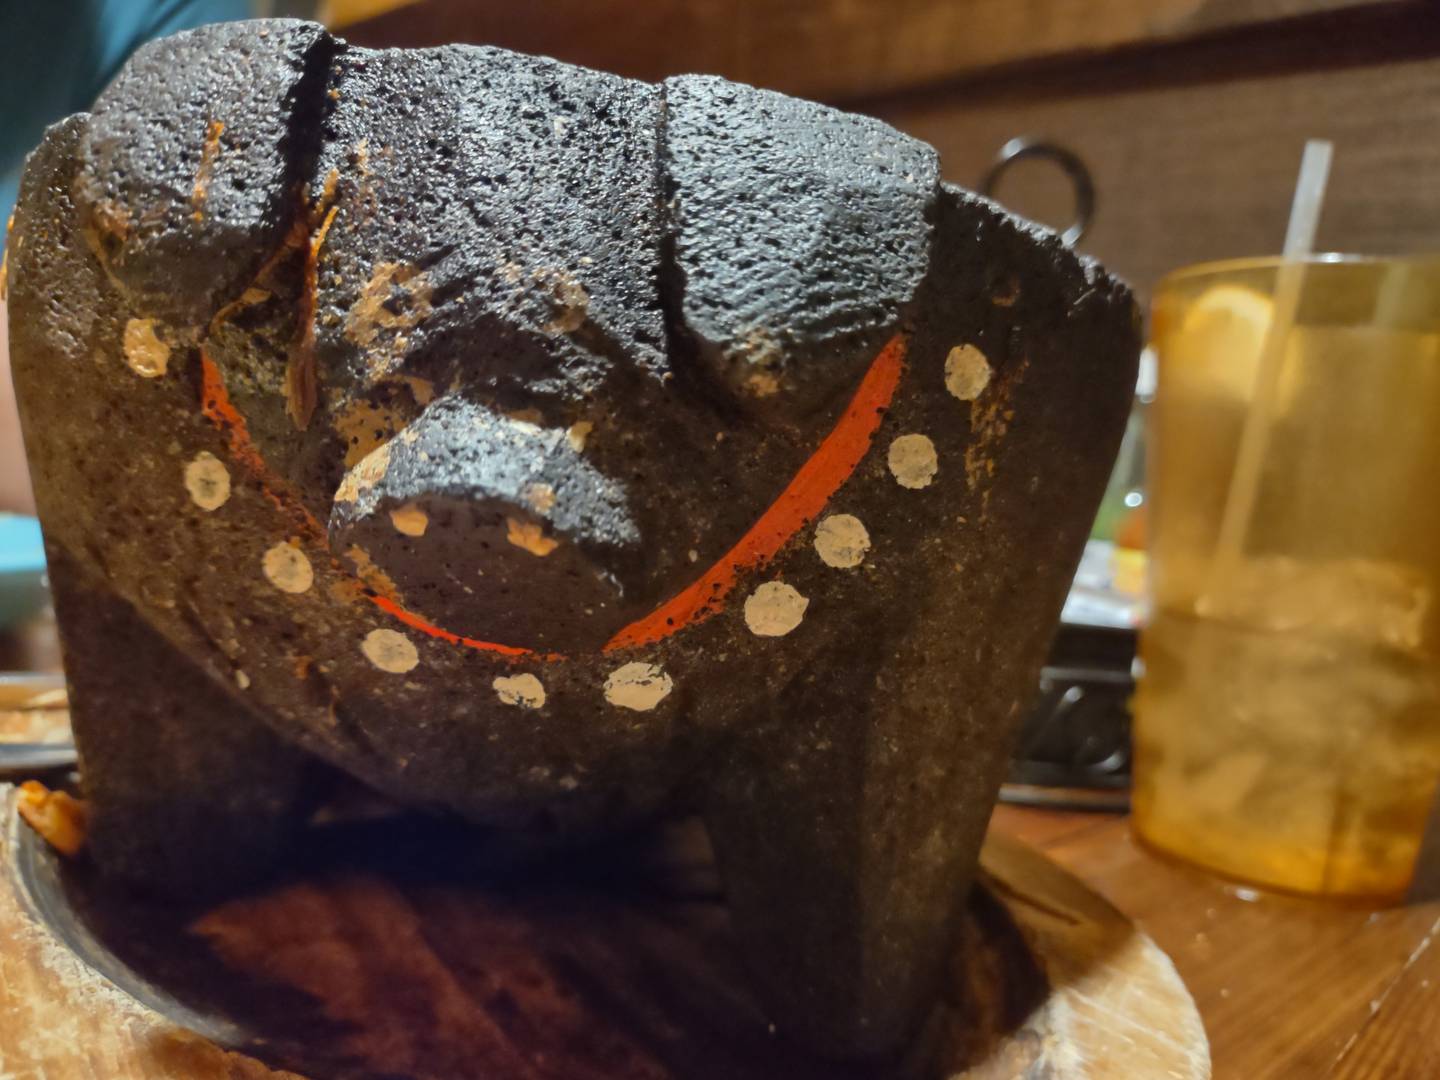 The molcajete at La Fondita Mexican Grill in Ottawa has the face of a pig.